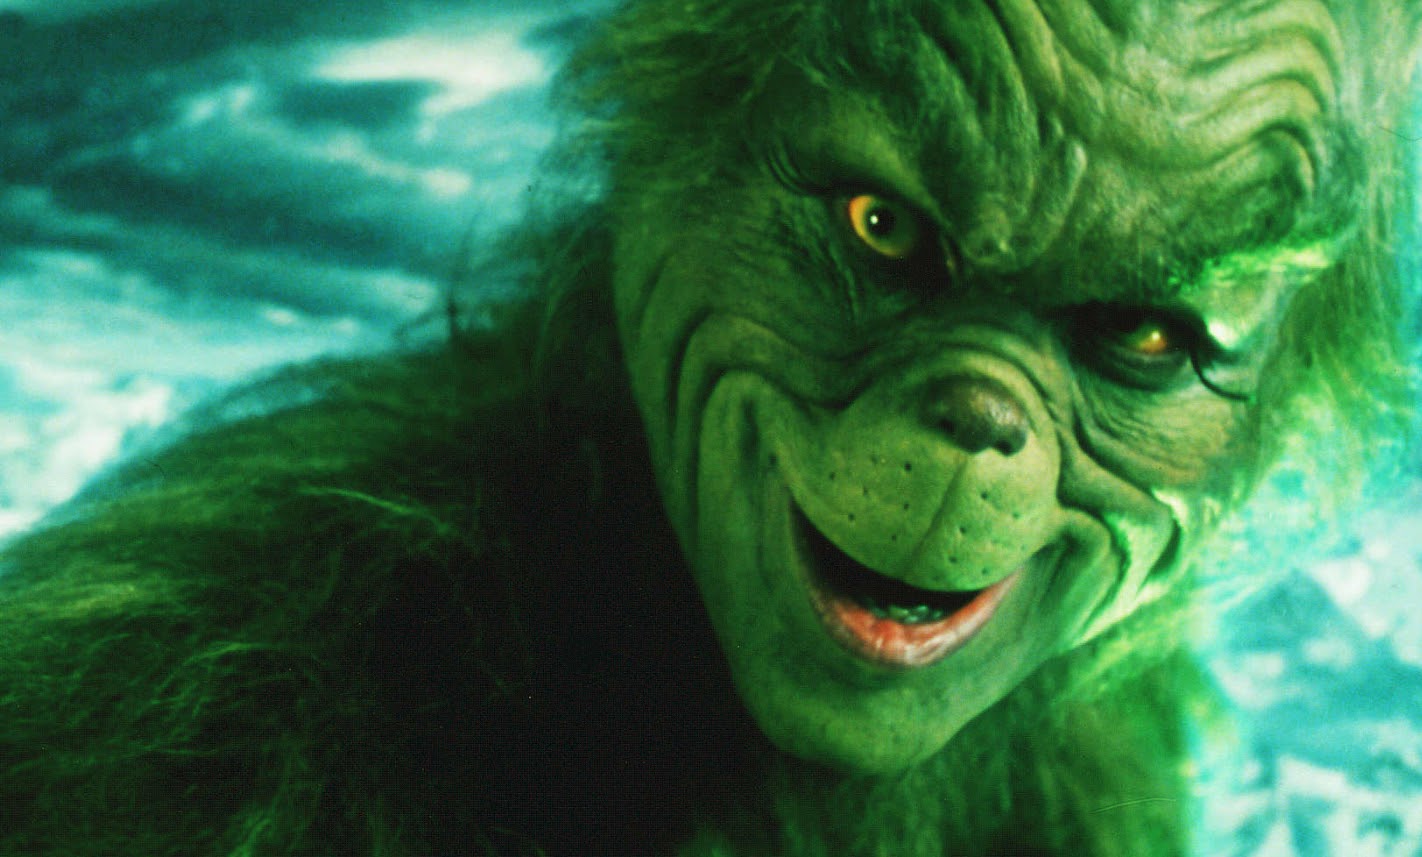 Jim Carrey as The Grinch